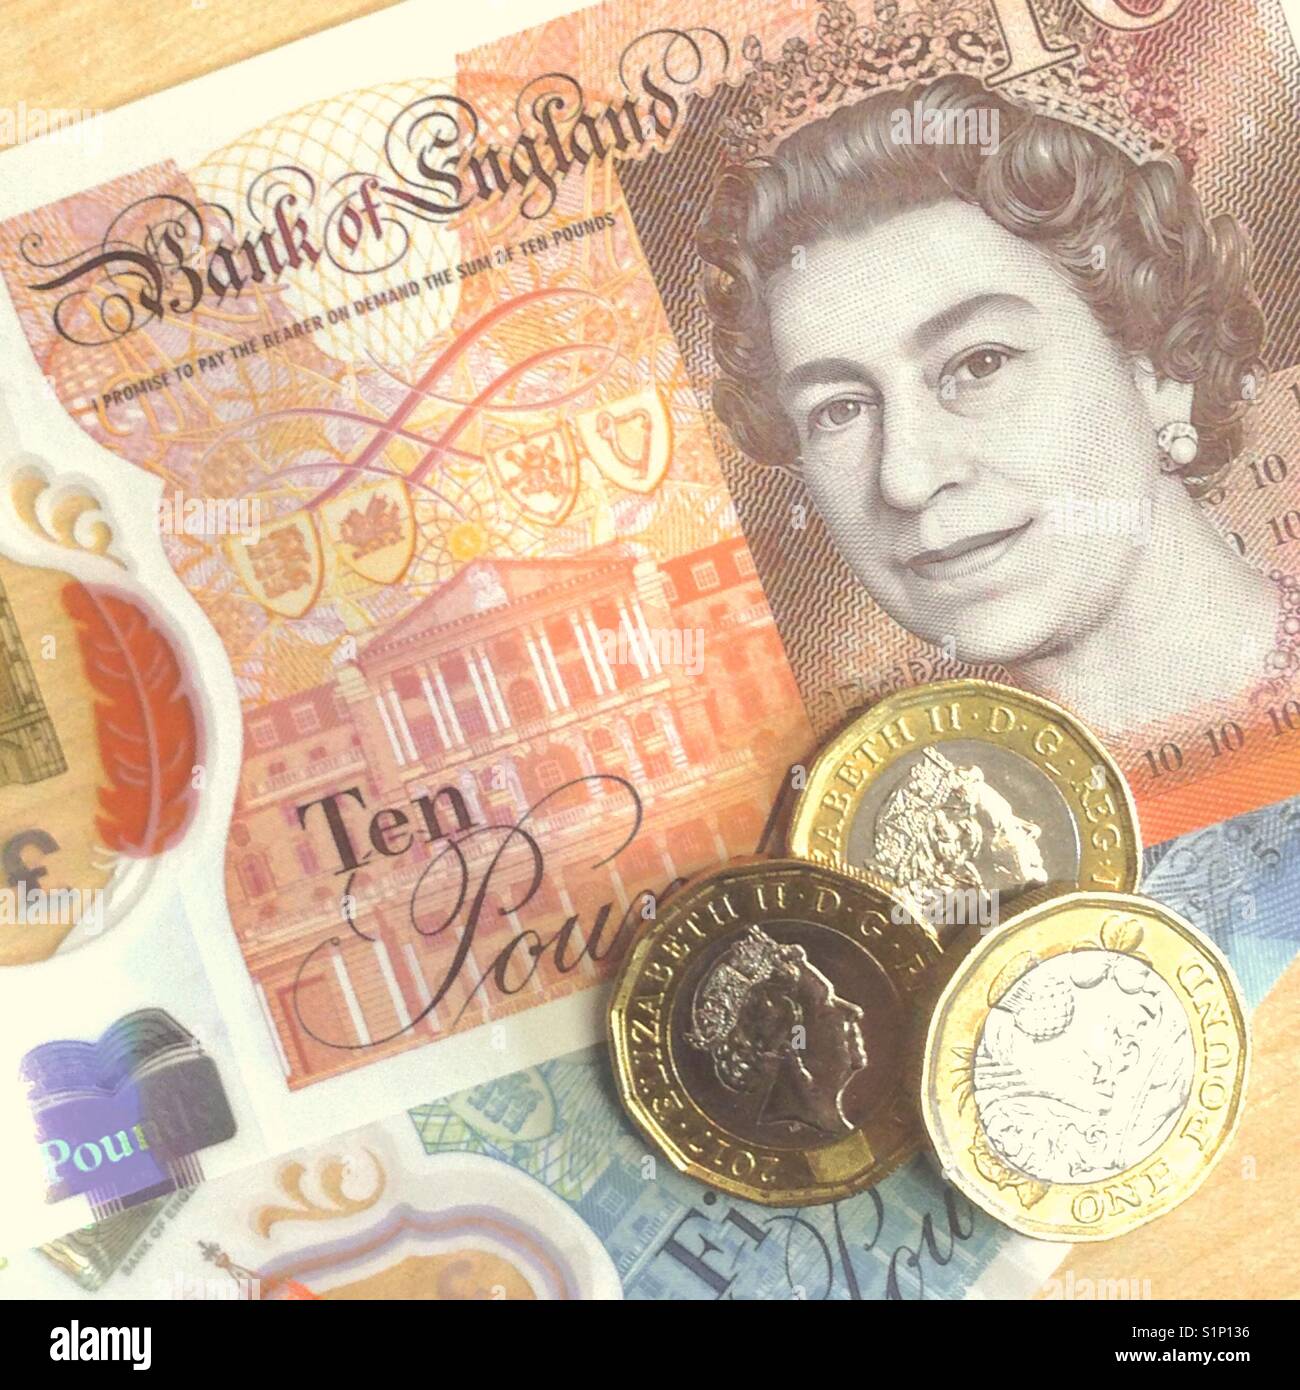 New £10 pounds note Stock Photo